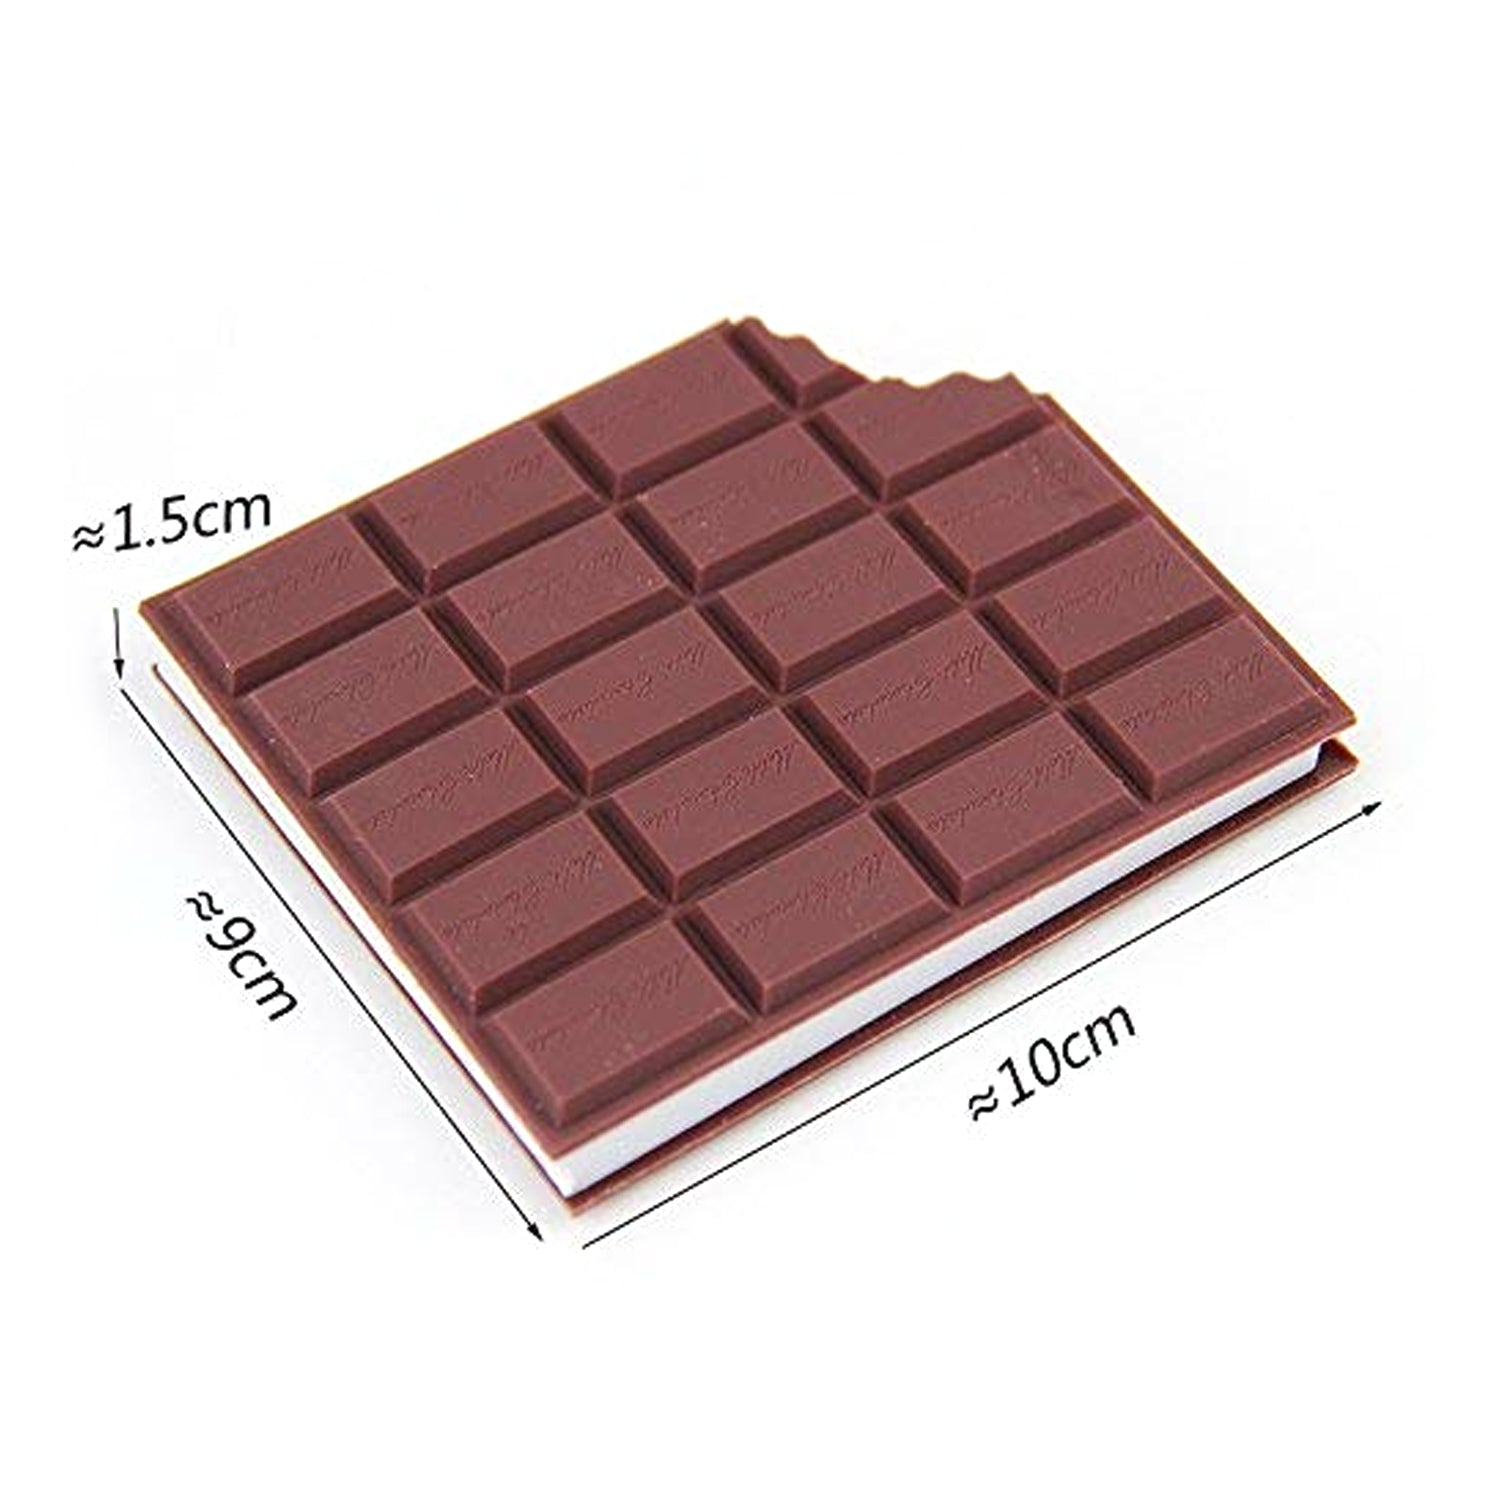 Cocolette: Chocolate Notebook